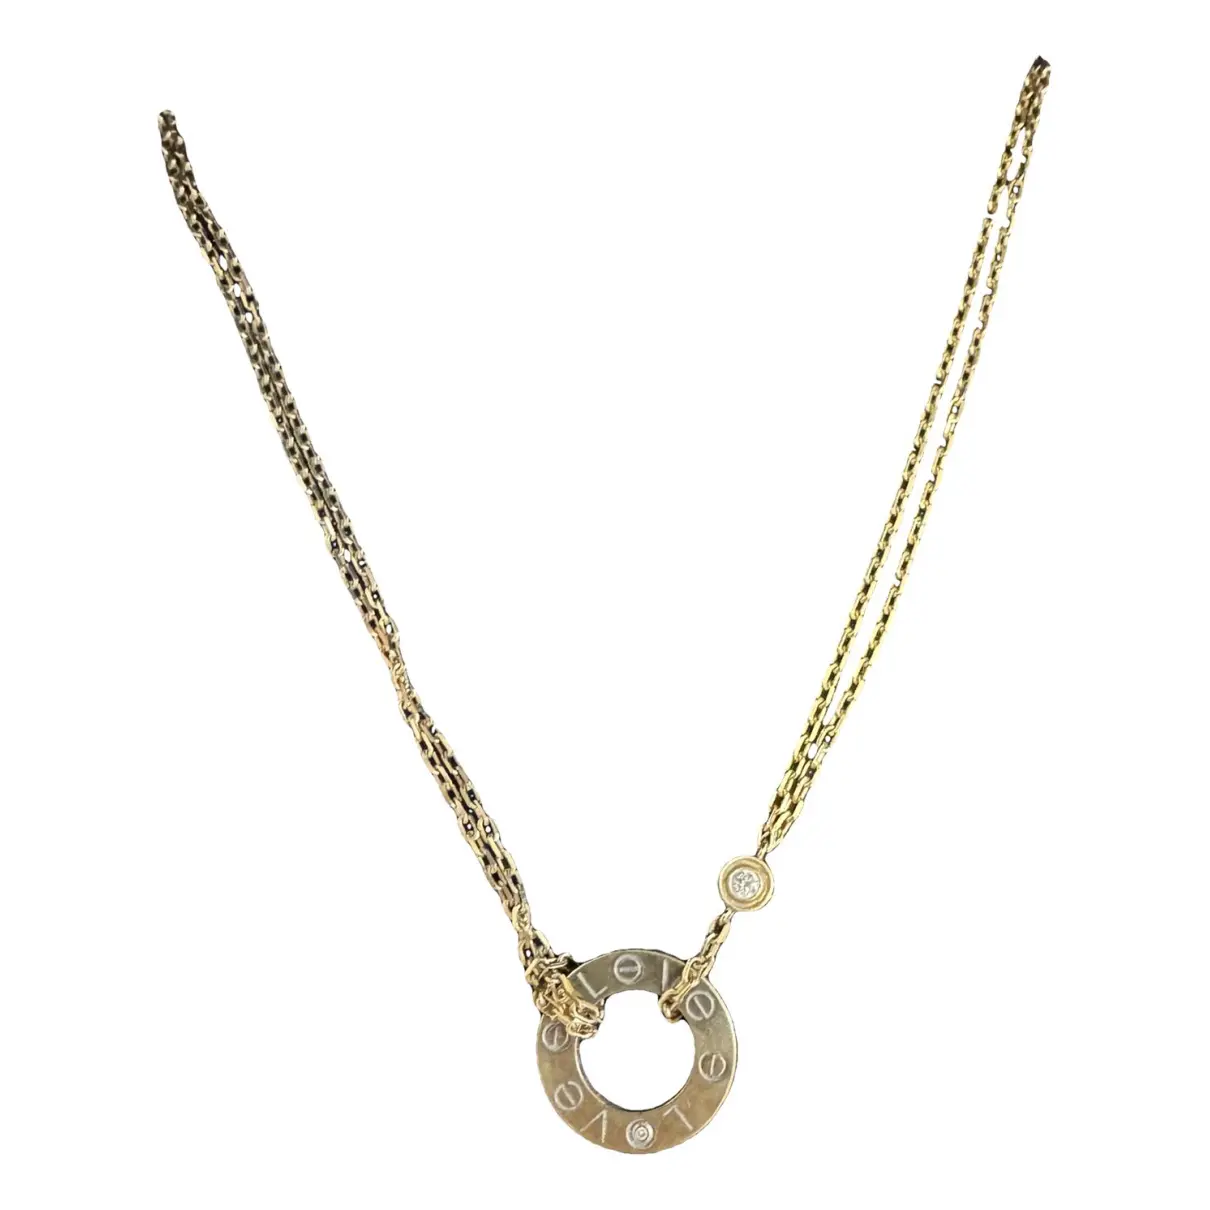 Love yellow gold necklace